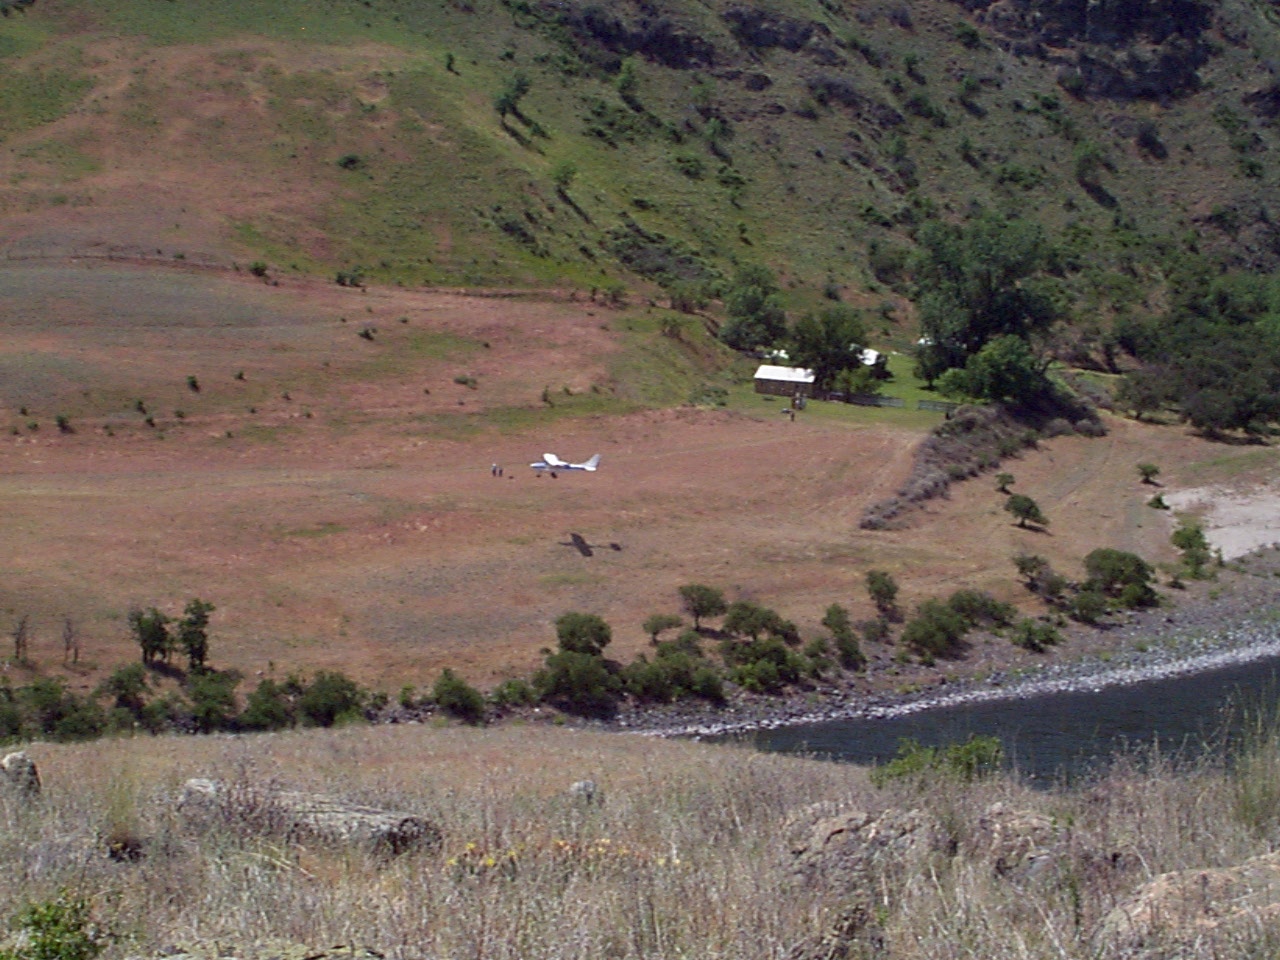 Airplane landing on a grassy backcountry airstrip at Pittsburg